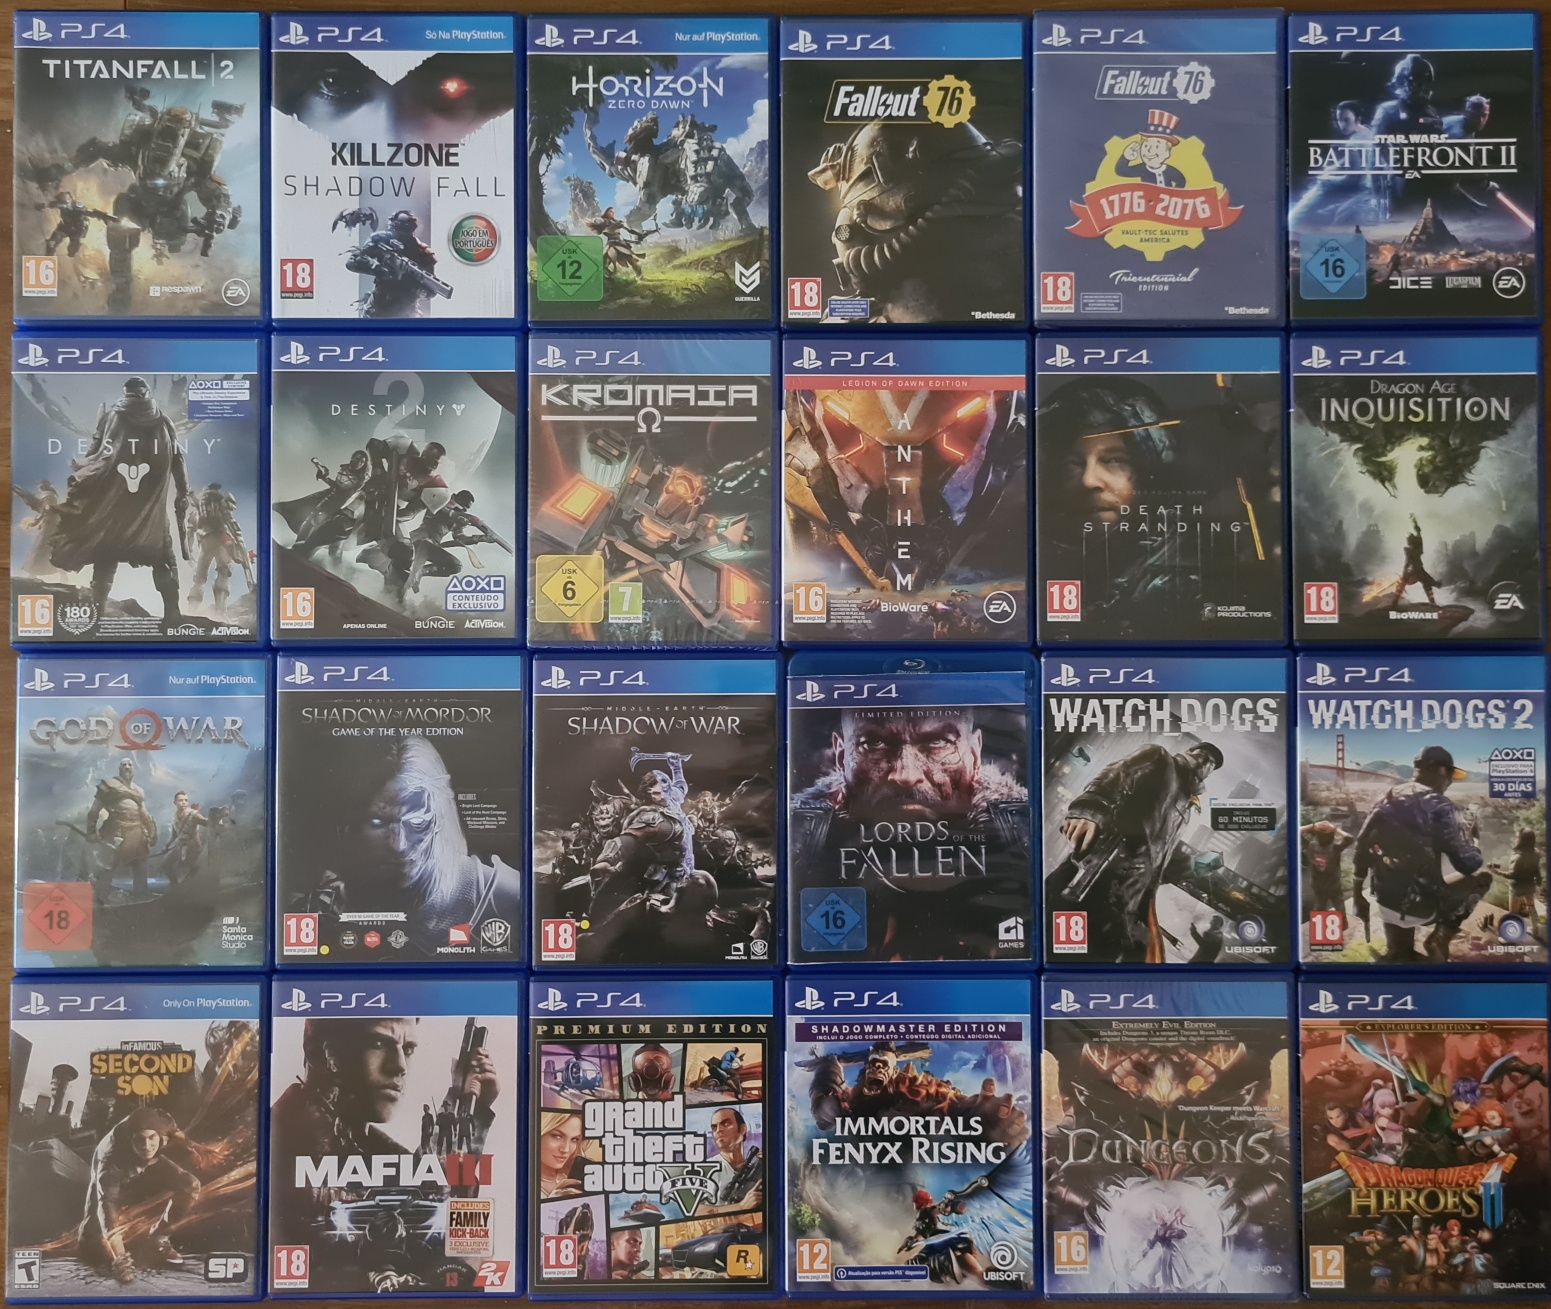 PS4 Fallout,God of War,watchdogs,Imortals Fenyx Rising,Dungeons